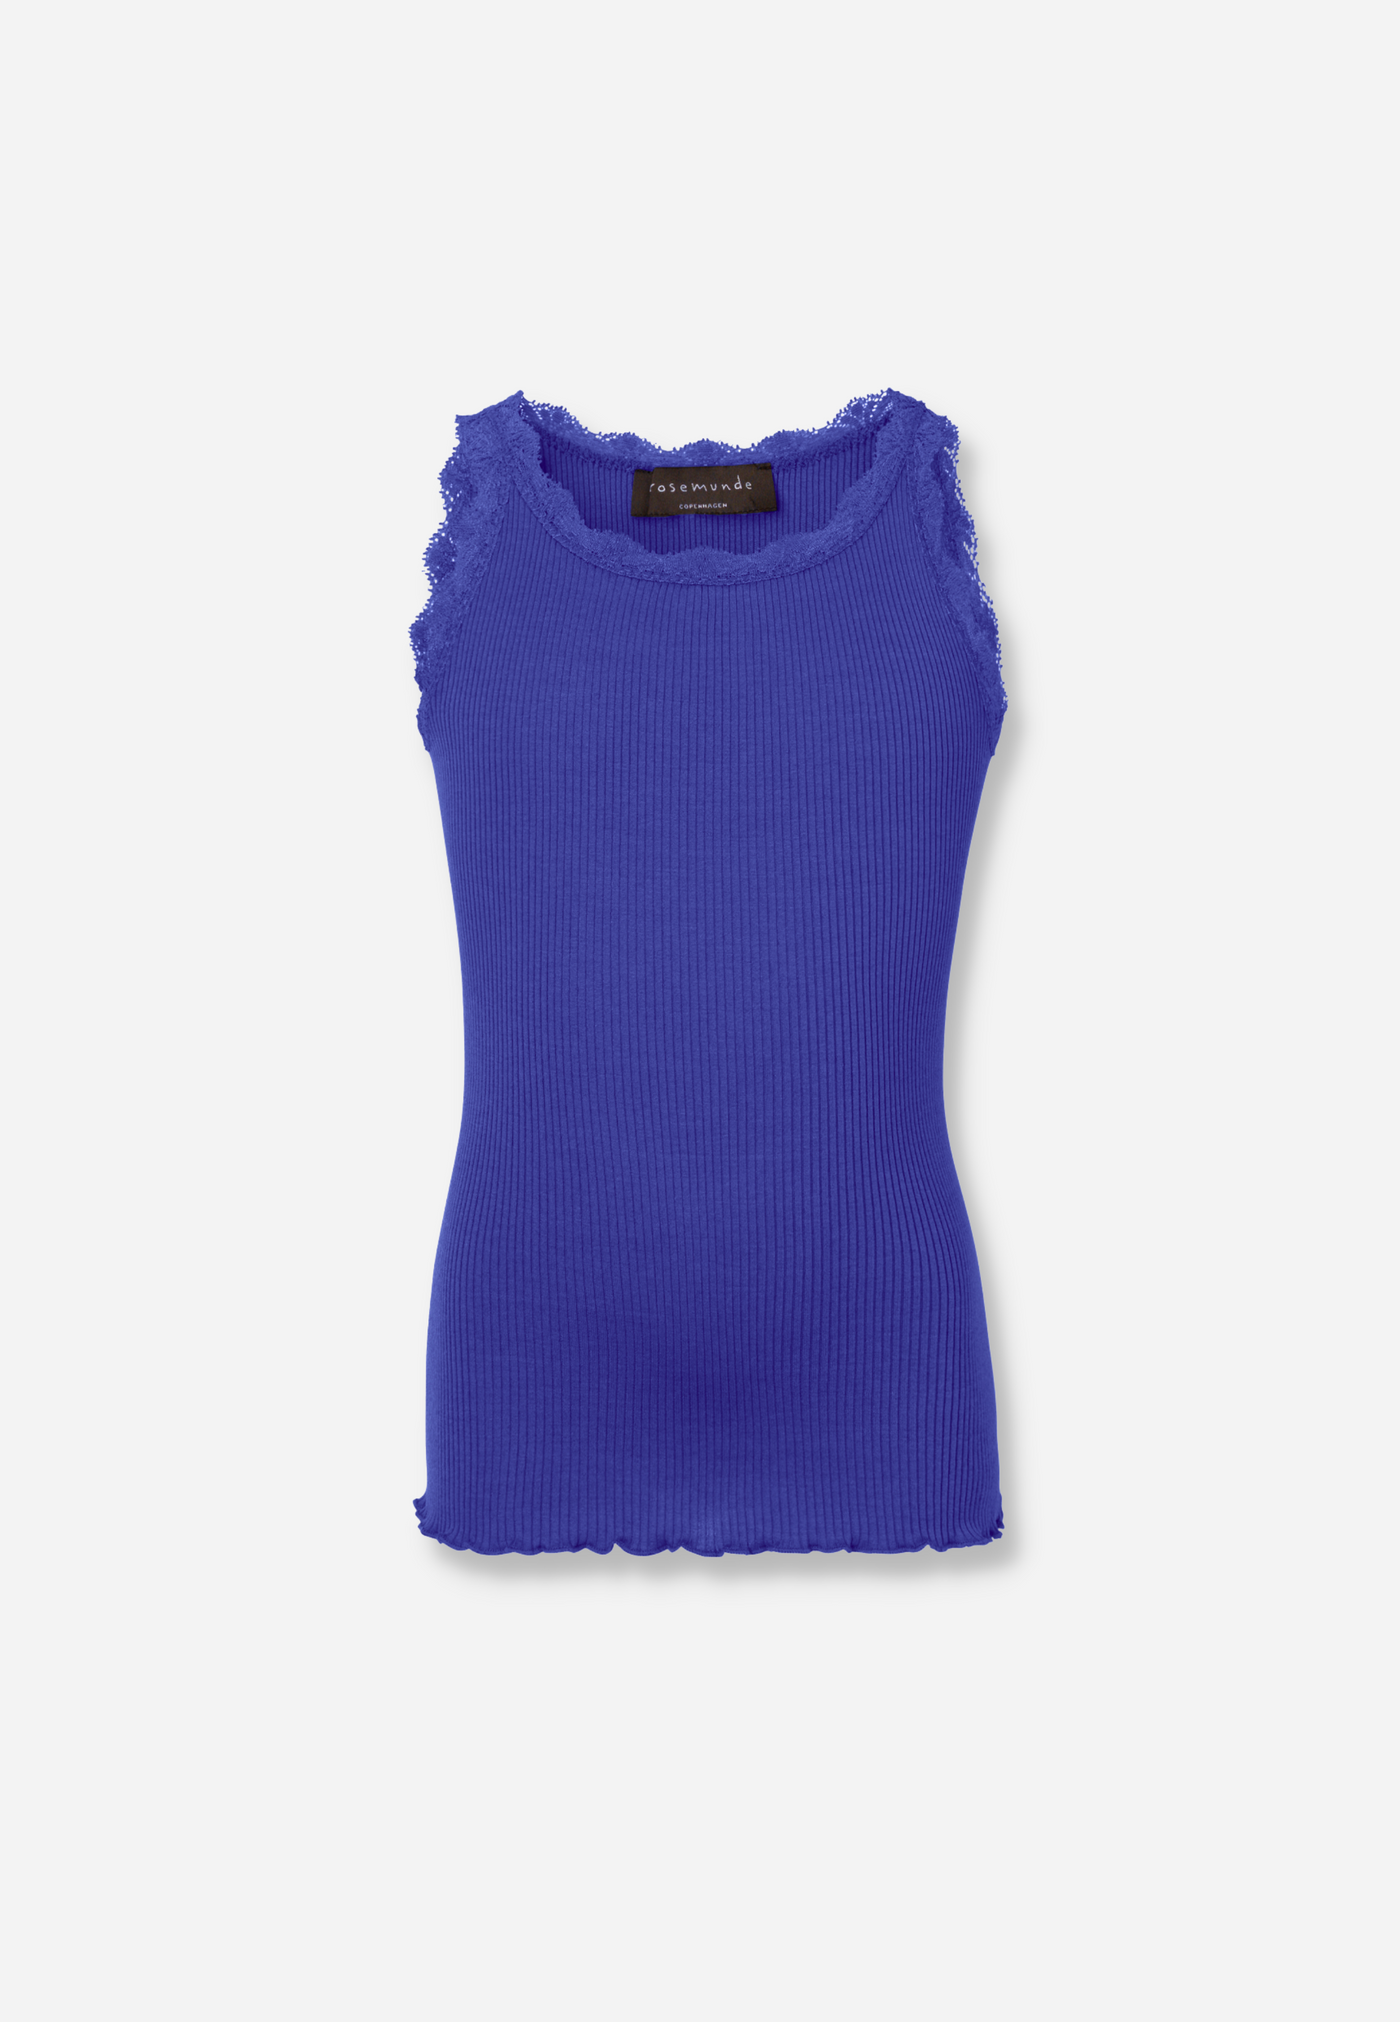 SILK TOP W/ LACE - VERY BLUE